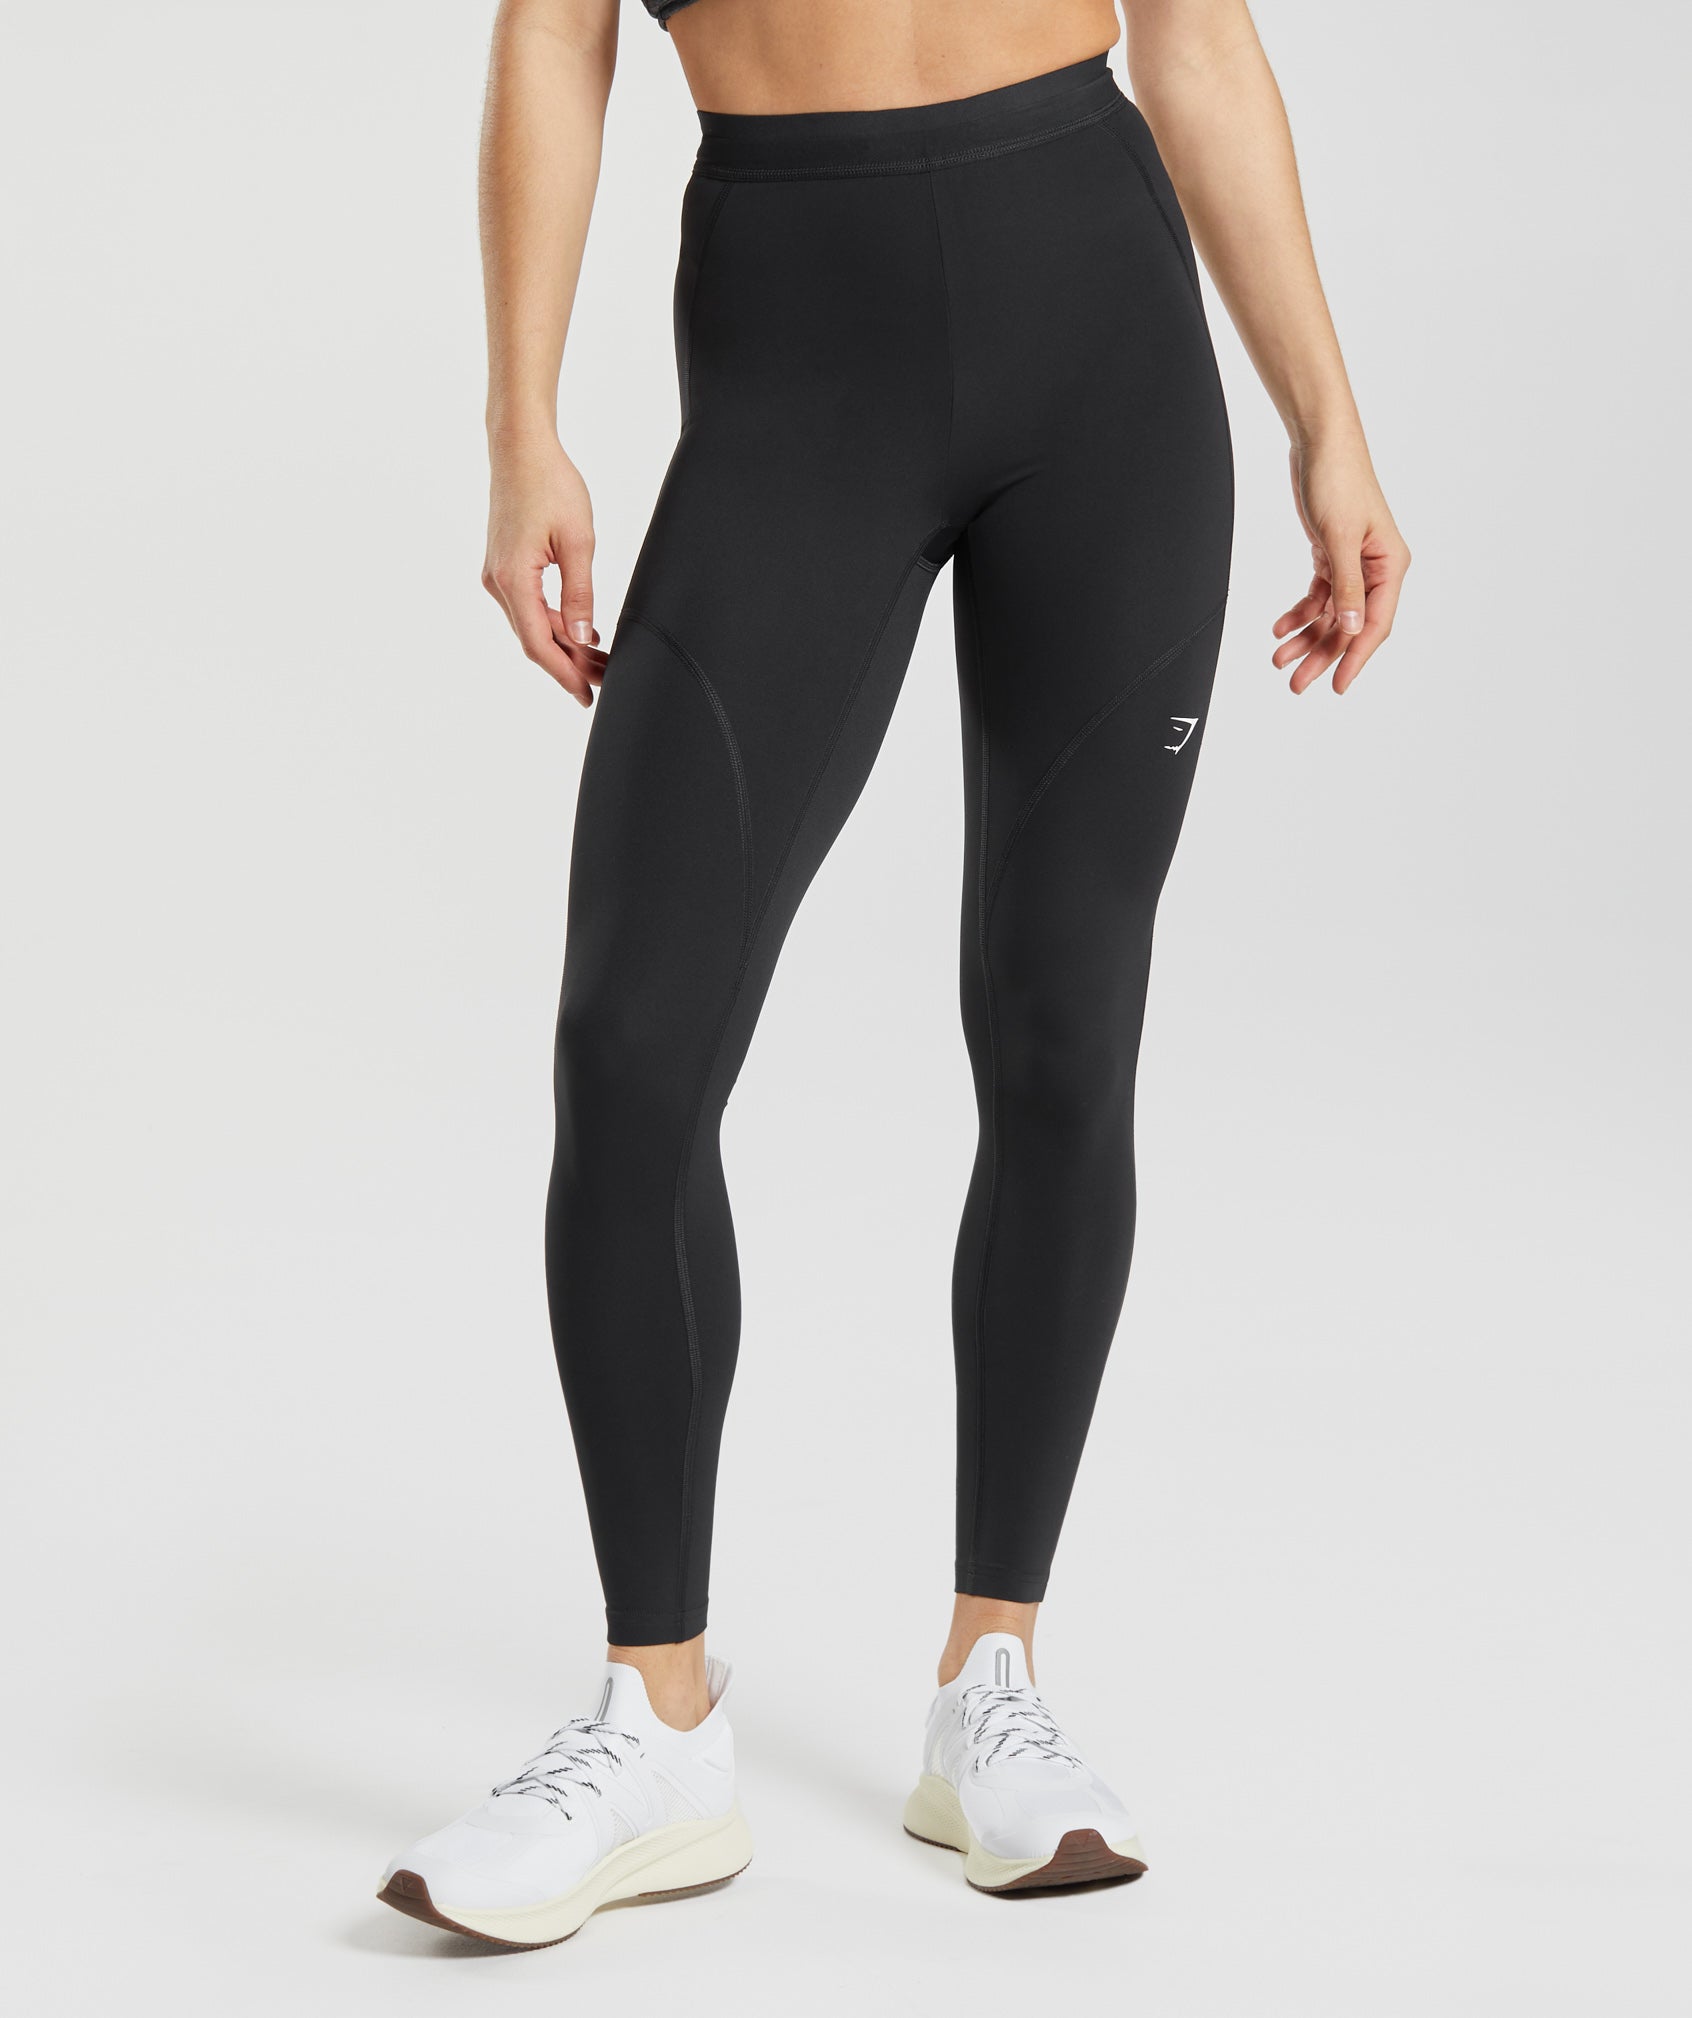 Women's Running Leggings SWIRL E-store  - Polish manufacturer  of sportswear for fitness, Crossfit, gym, running. Quick delivery and easy  return and exchange